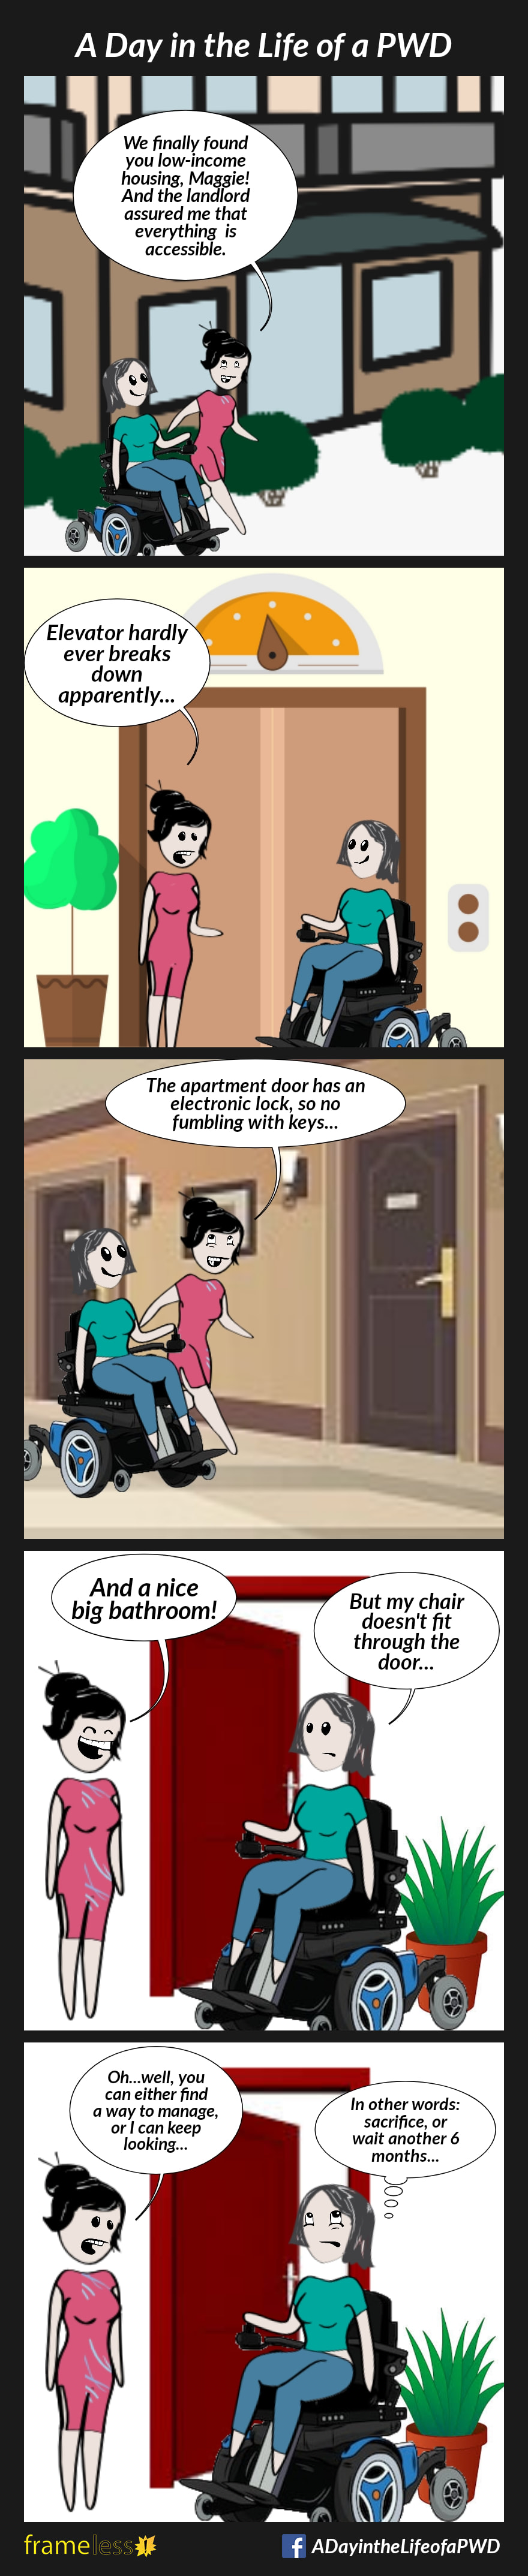 COMIC STRIP 
A Day in the Life of a PWD (Person With a Disability) 

Frame 1:
A woman in a power wheelchair is outside an apartment building with her case worker.
CASE WORKER: We finally found you low-income housing, Maggie! And the landlord assured me that everything is accessible.

Frame 2:
Inside the building, they wait for the elevator.
CASE WORKER: Elevator hardly ever breaks down, apparently...

Frame 3:
They approach the apartment door.
CASE WORKER: The apartment door has an electronic lock, so no fumbling for keys...

Frame 4:
Inside the apartment, they are outside the bathroom door.
CASE WORKER: And a nice big bathroom!
MAGGIE: But my chair doesn't fit through the door...

Frame 5:
CASE WORKER: Oh...well you can either find a way to manage, or I can keep looking...
MAGGIE (thinking to herself): In other words: sacrifice, or wait another 6 months...